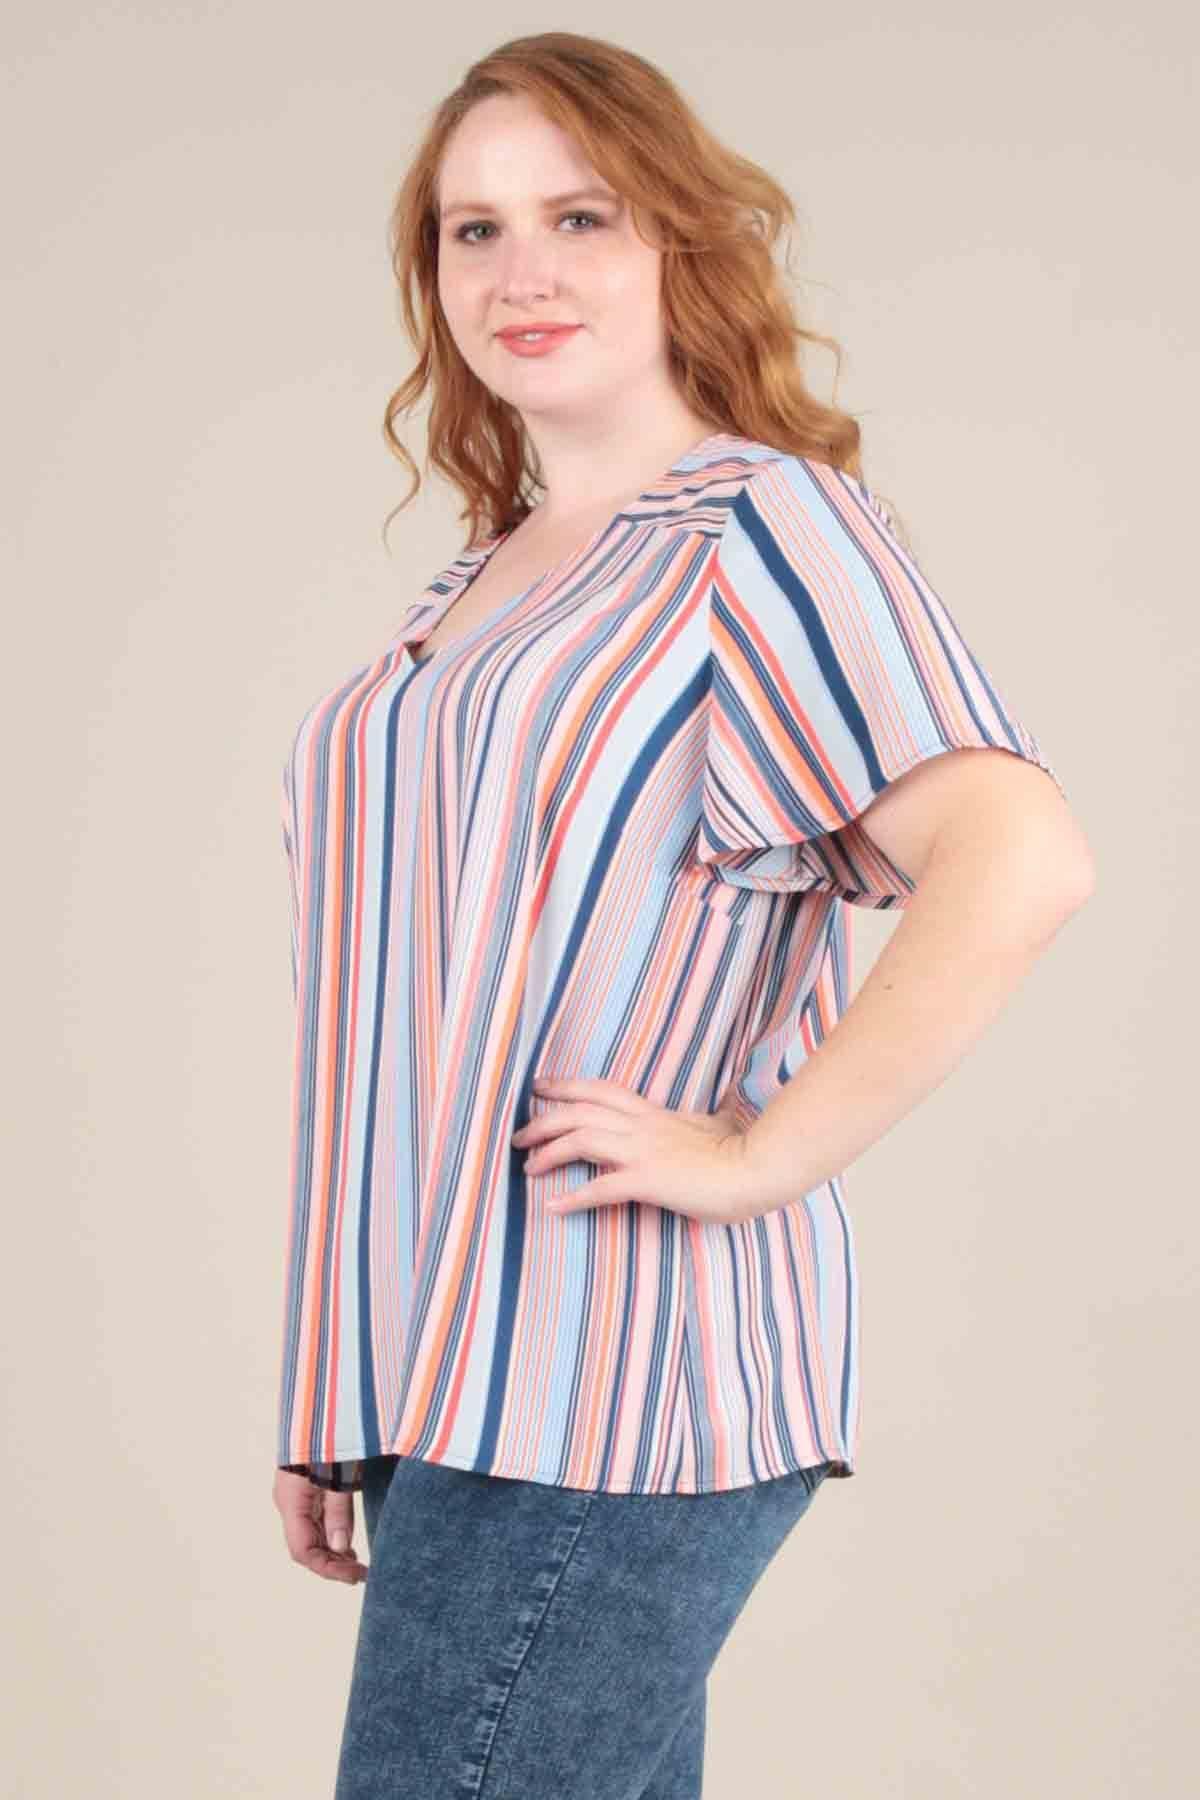 Diane Vertical Logo - Diane Vertical Striped Top | Women's Plus Size Tops | SKIES ARE BLUE